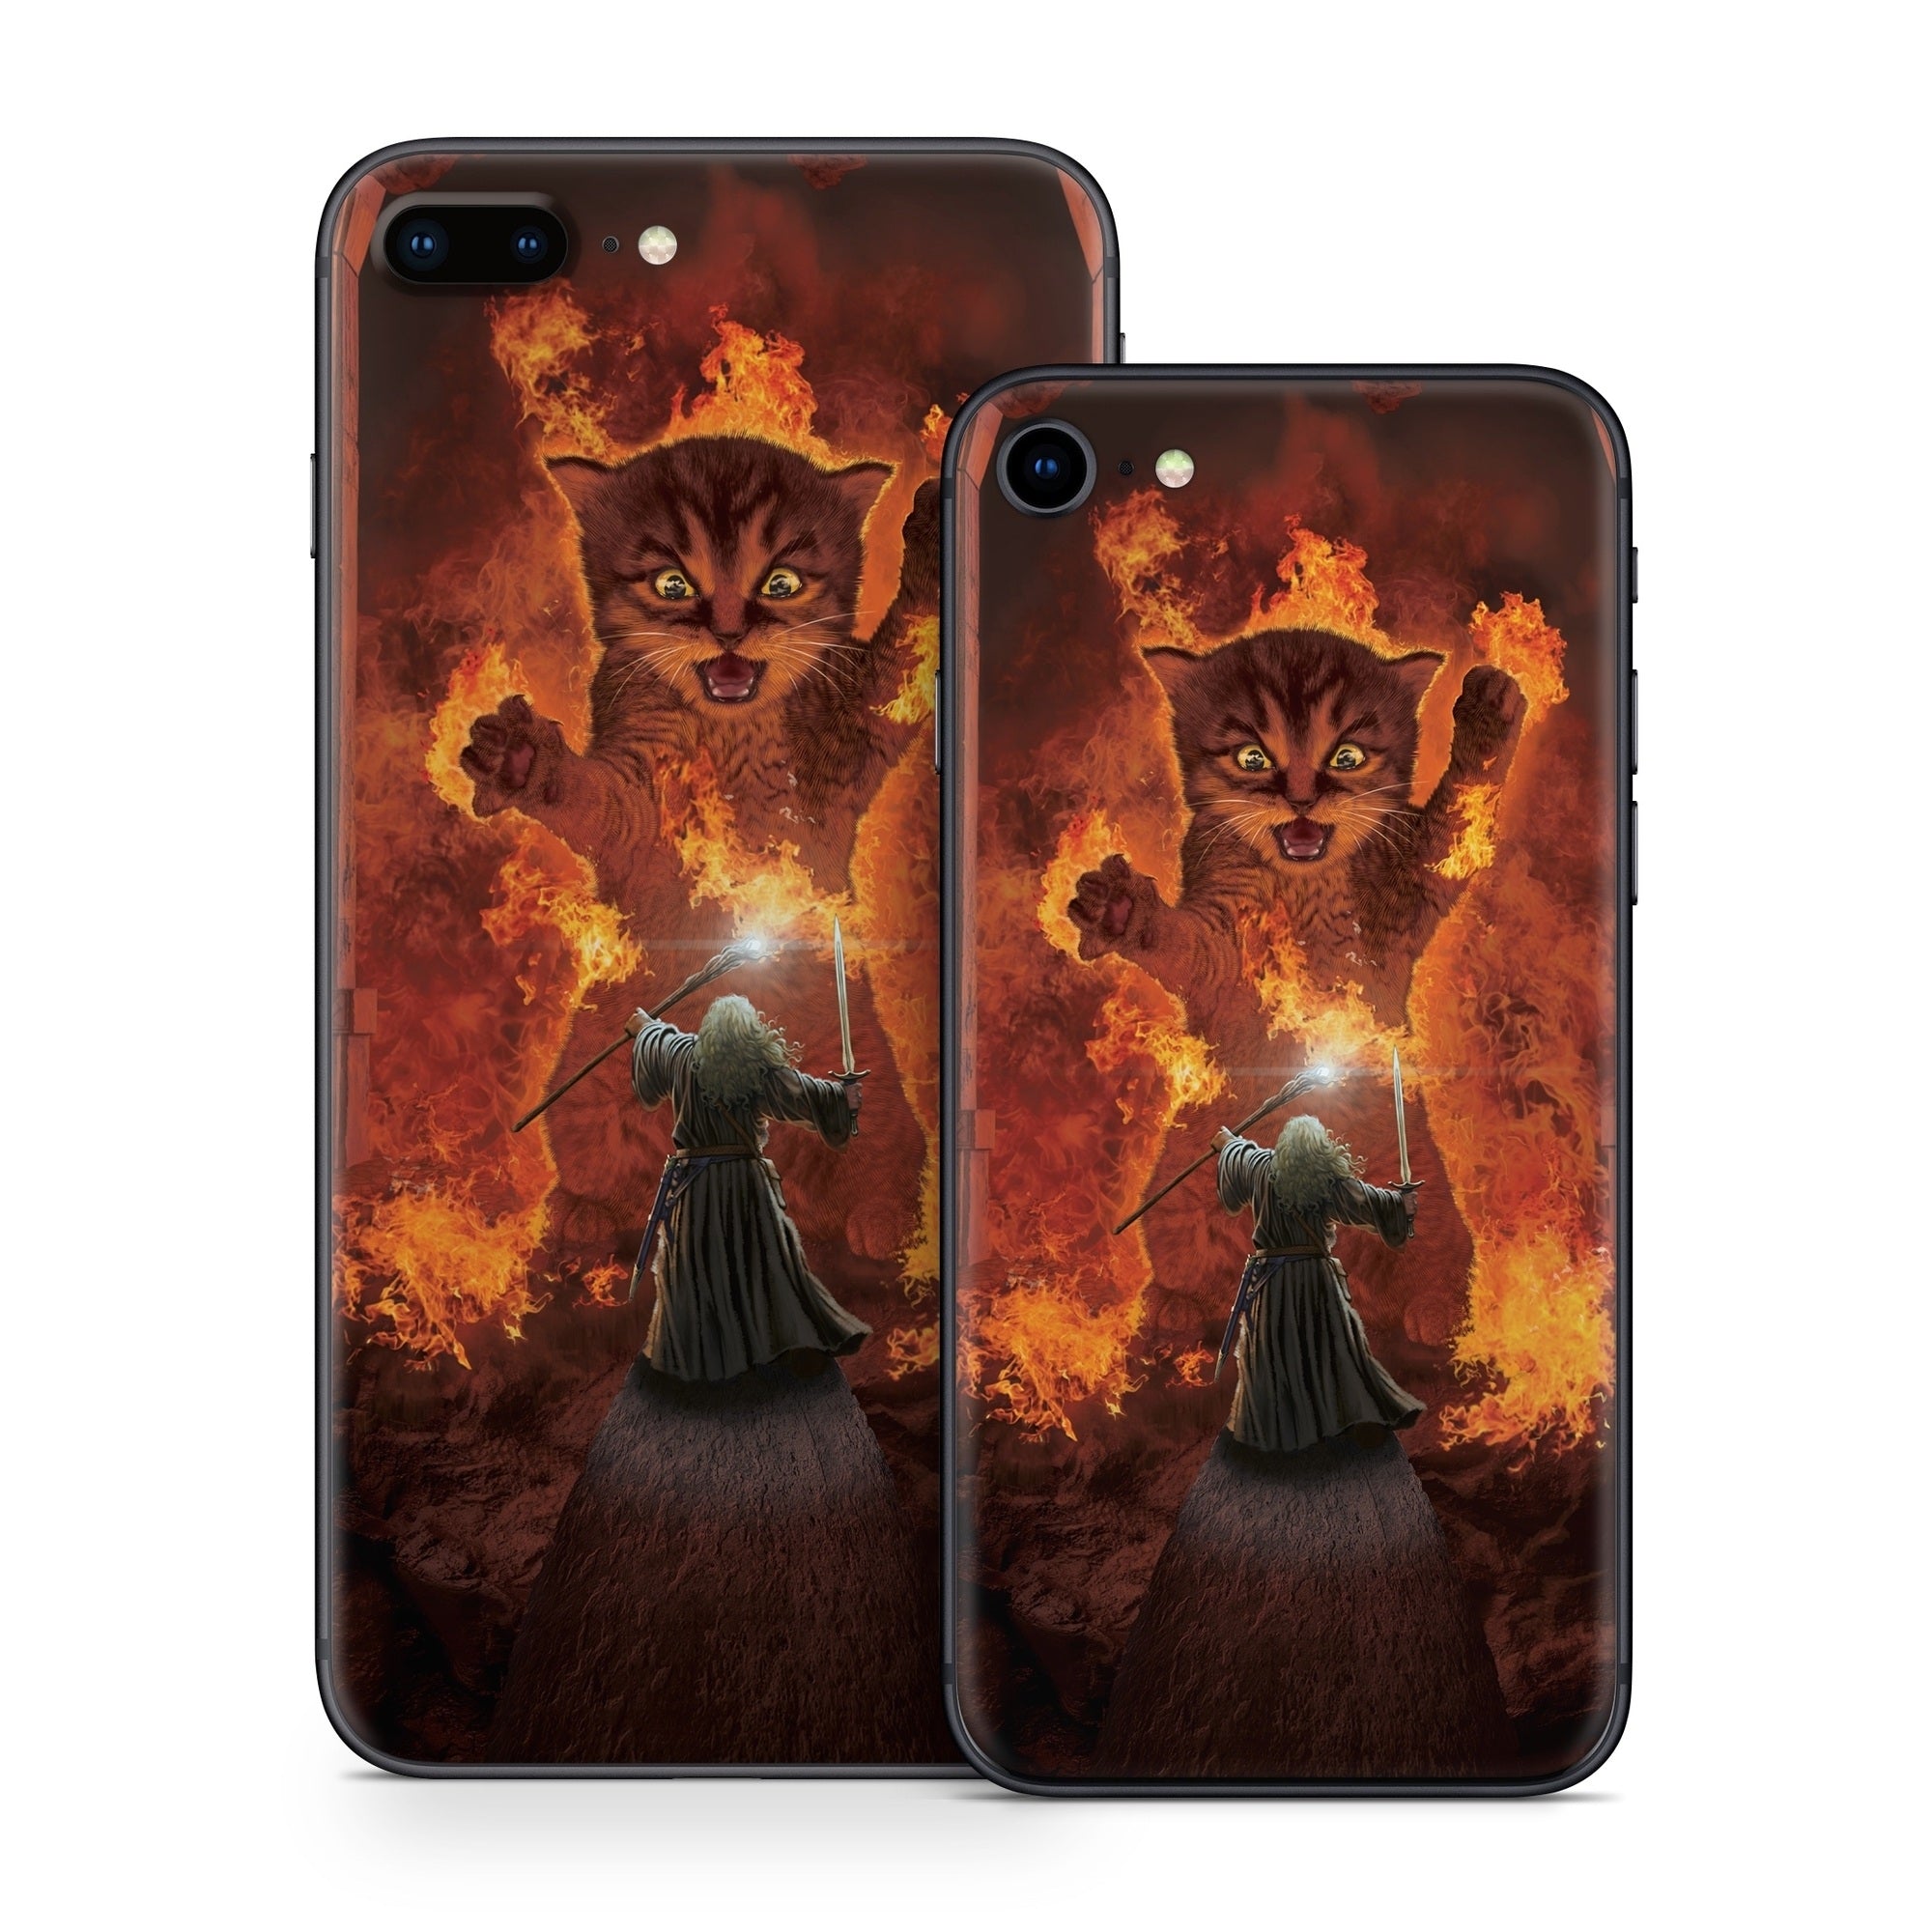 You Shall Not Pass - Apple iPhone 8 Skin